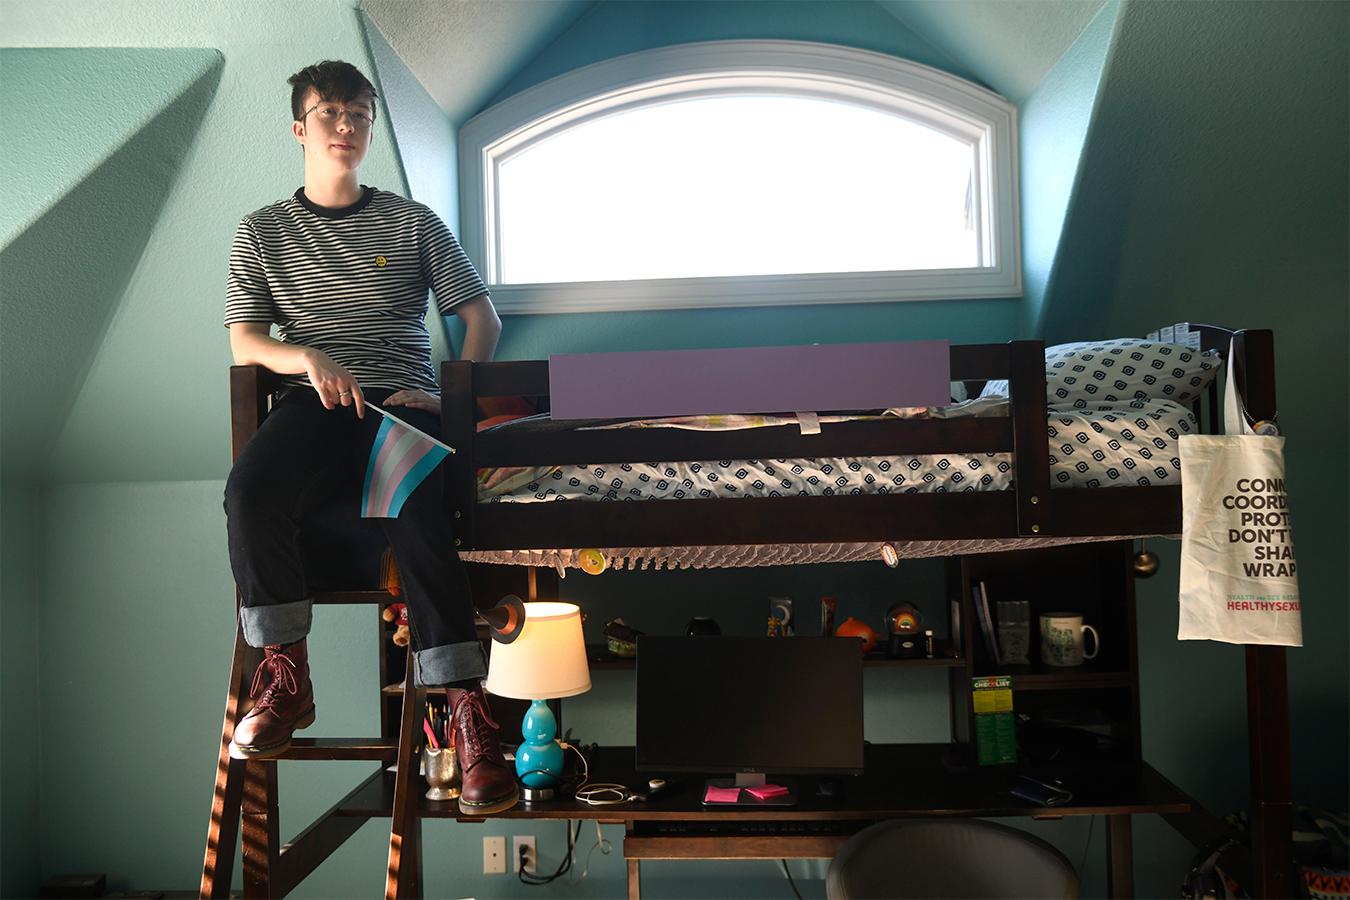 Charlie Apple holds a transgender pride flag while sitting on his bed.